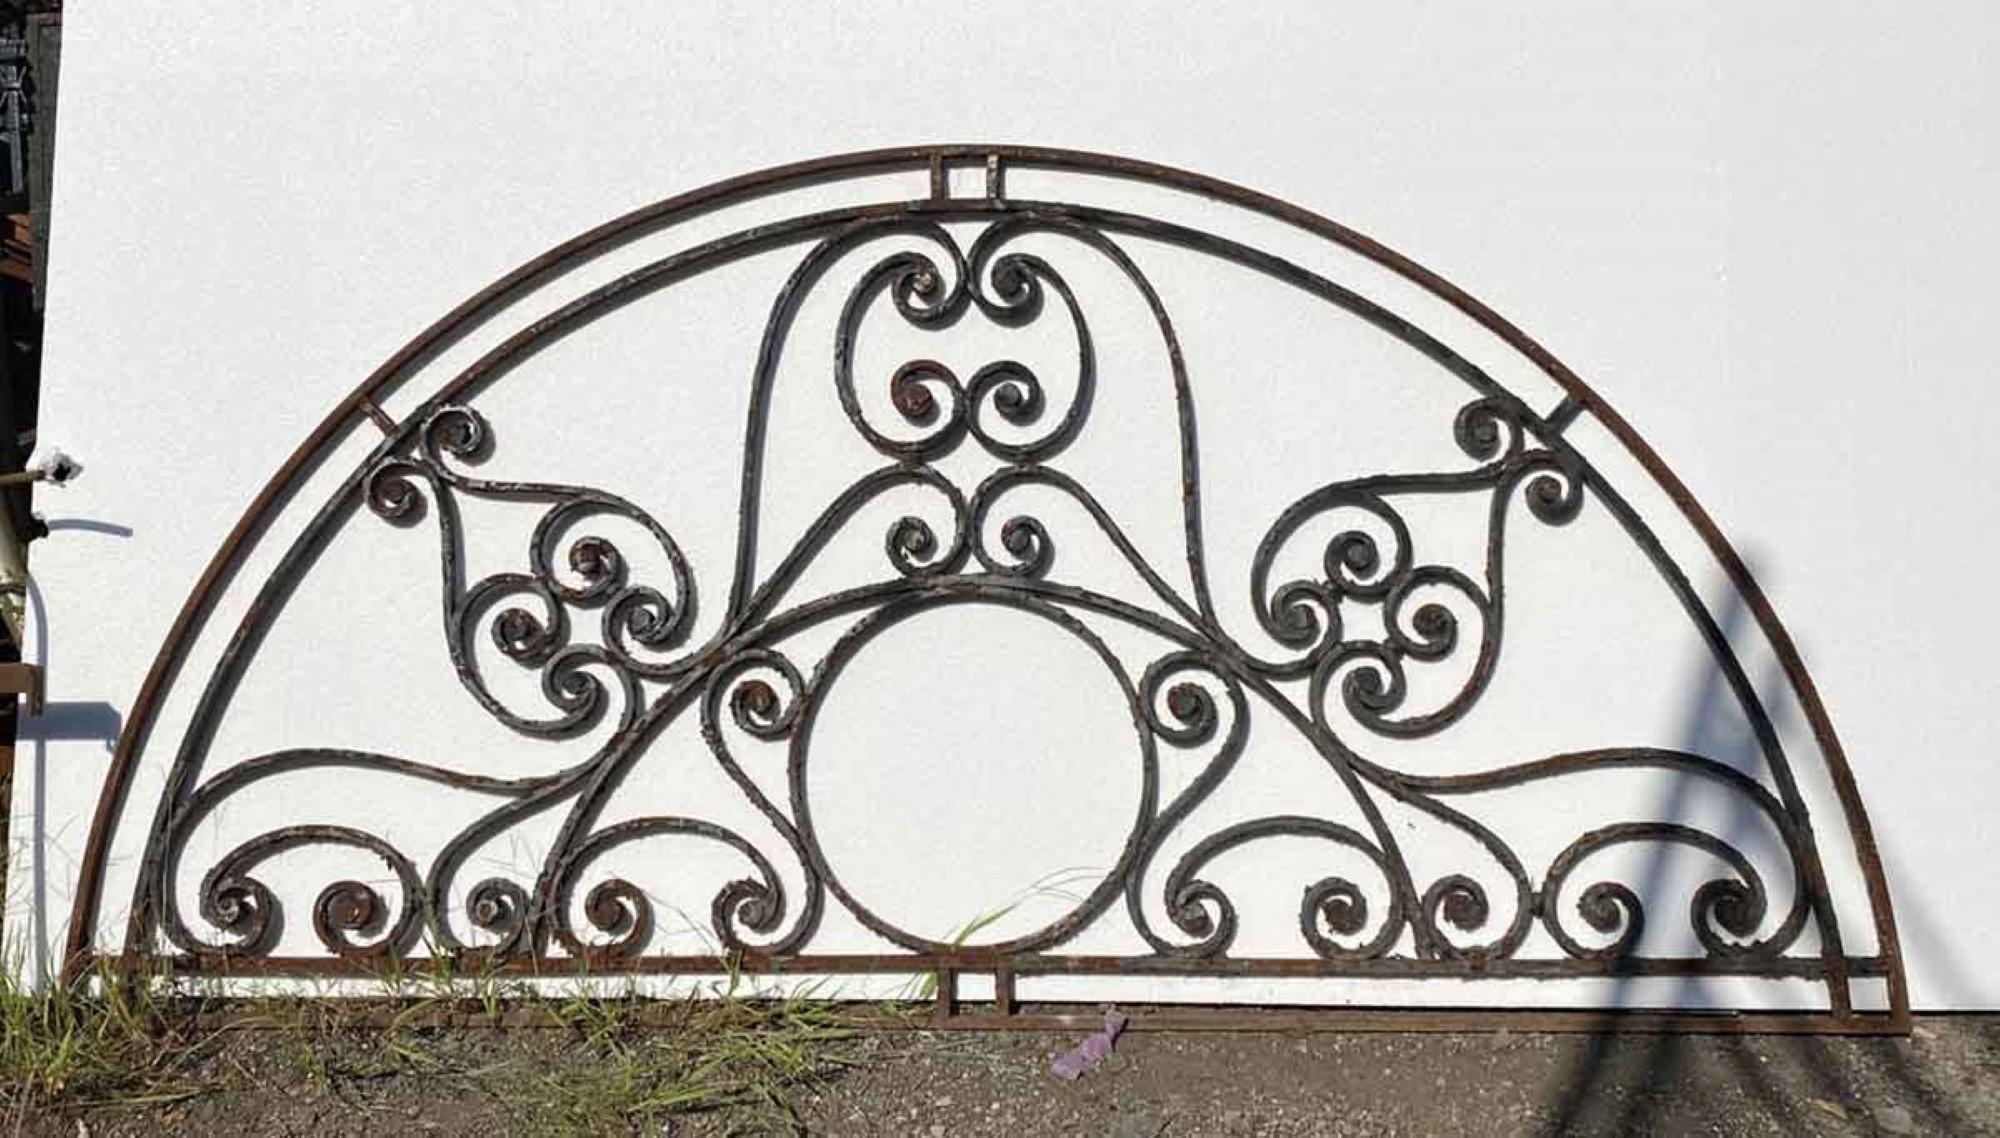 American 1890s Ornate Wrought Iron Arched Door Transom with Hand Forged Curls